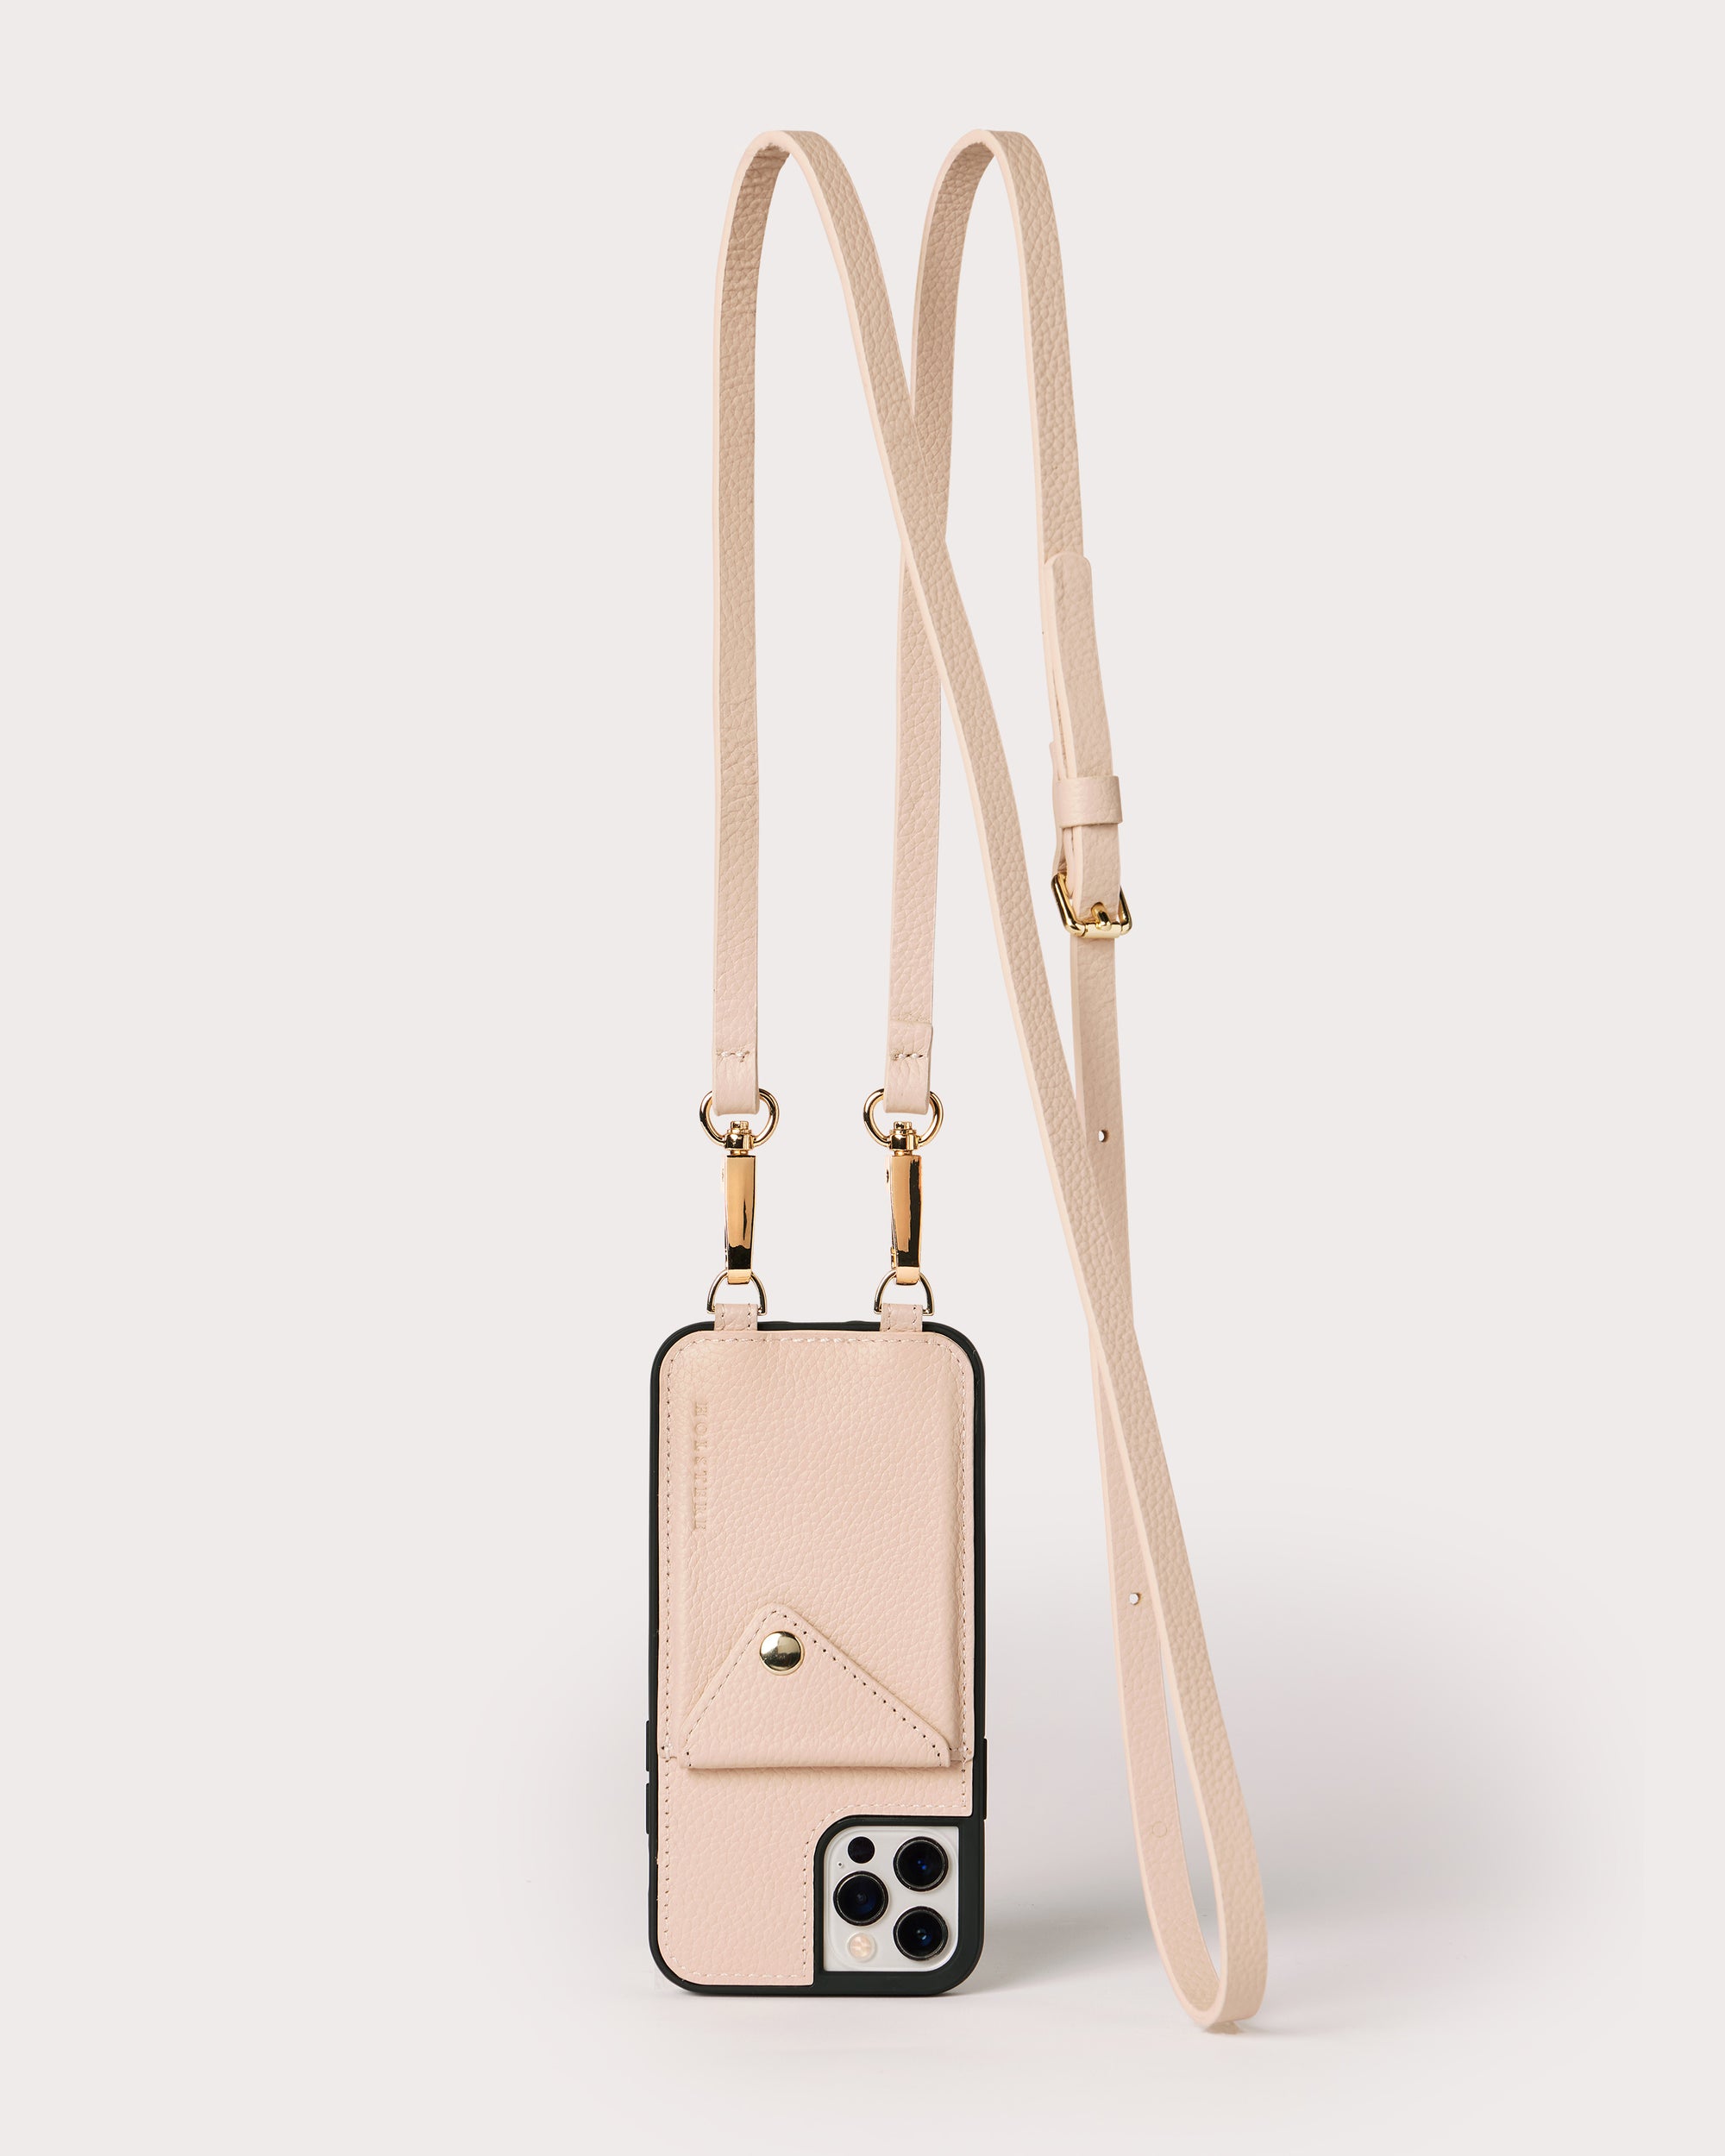 Holstere Genuine Leather iPhone Case Crossbody Phone Purse Cross Body Holster Clip for Easy Carry Hands Free - Cream (Rosy Blush / Pink) Pebbled Real Leather Snap In Phone Case with Wallet Credit Card ID Sleeve, Snap Shut Button, and Adjustable Length Shoulder Strap with Gold Hardware and Clasps. iPhone Leash for iPhone 6, 6s, 7, 8, SE, X, 10, XS, XR, 11, 11 Pro, 11 Pro Max, 12, 12 Pro, 12 Pro Max, 13, 13 Pro, 13 Pro Max, 13 Mini